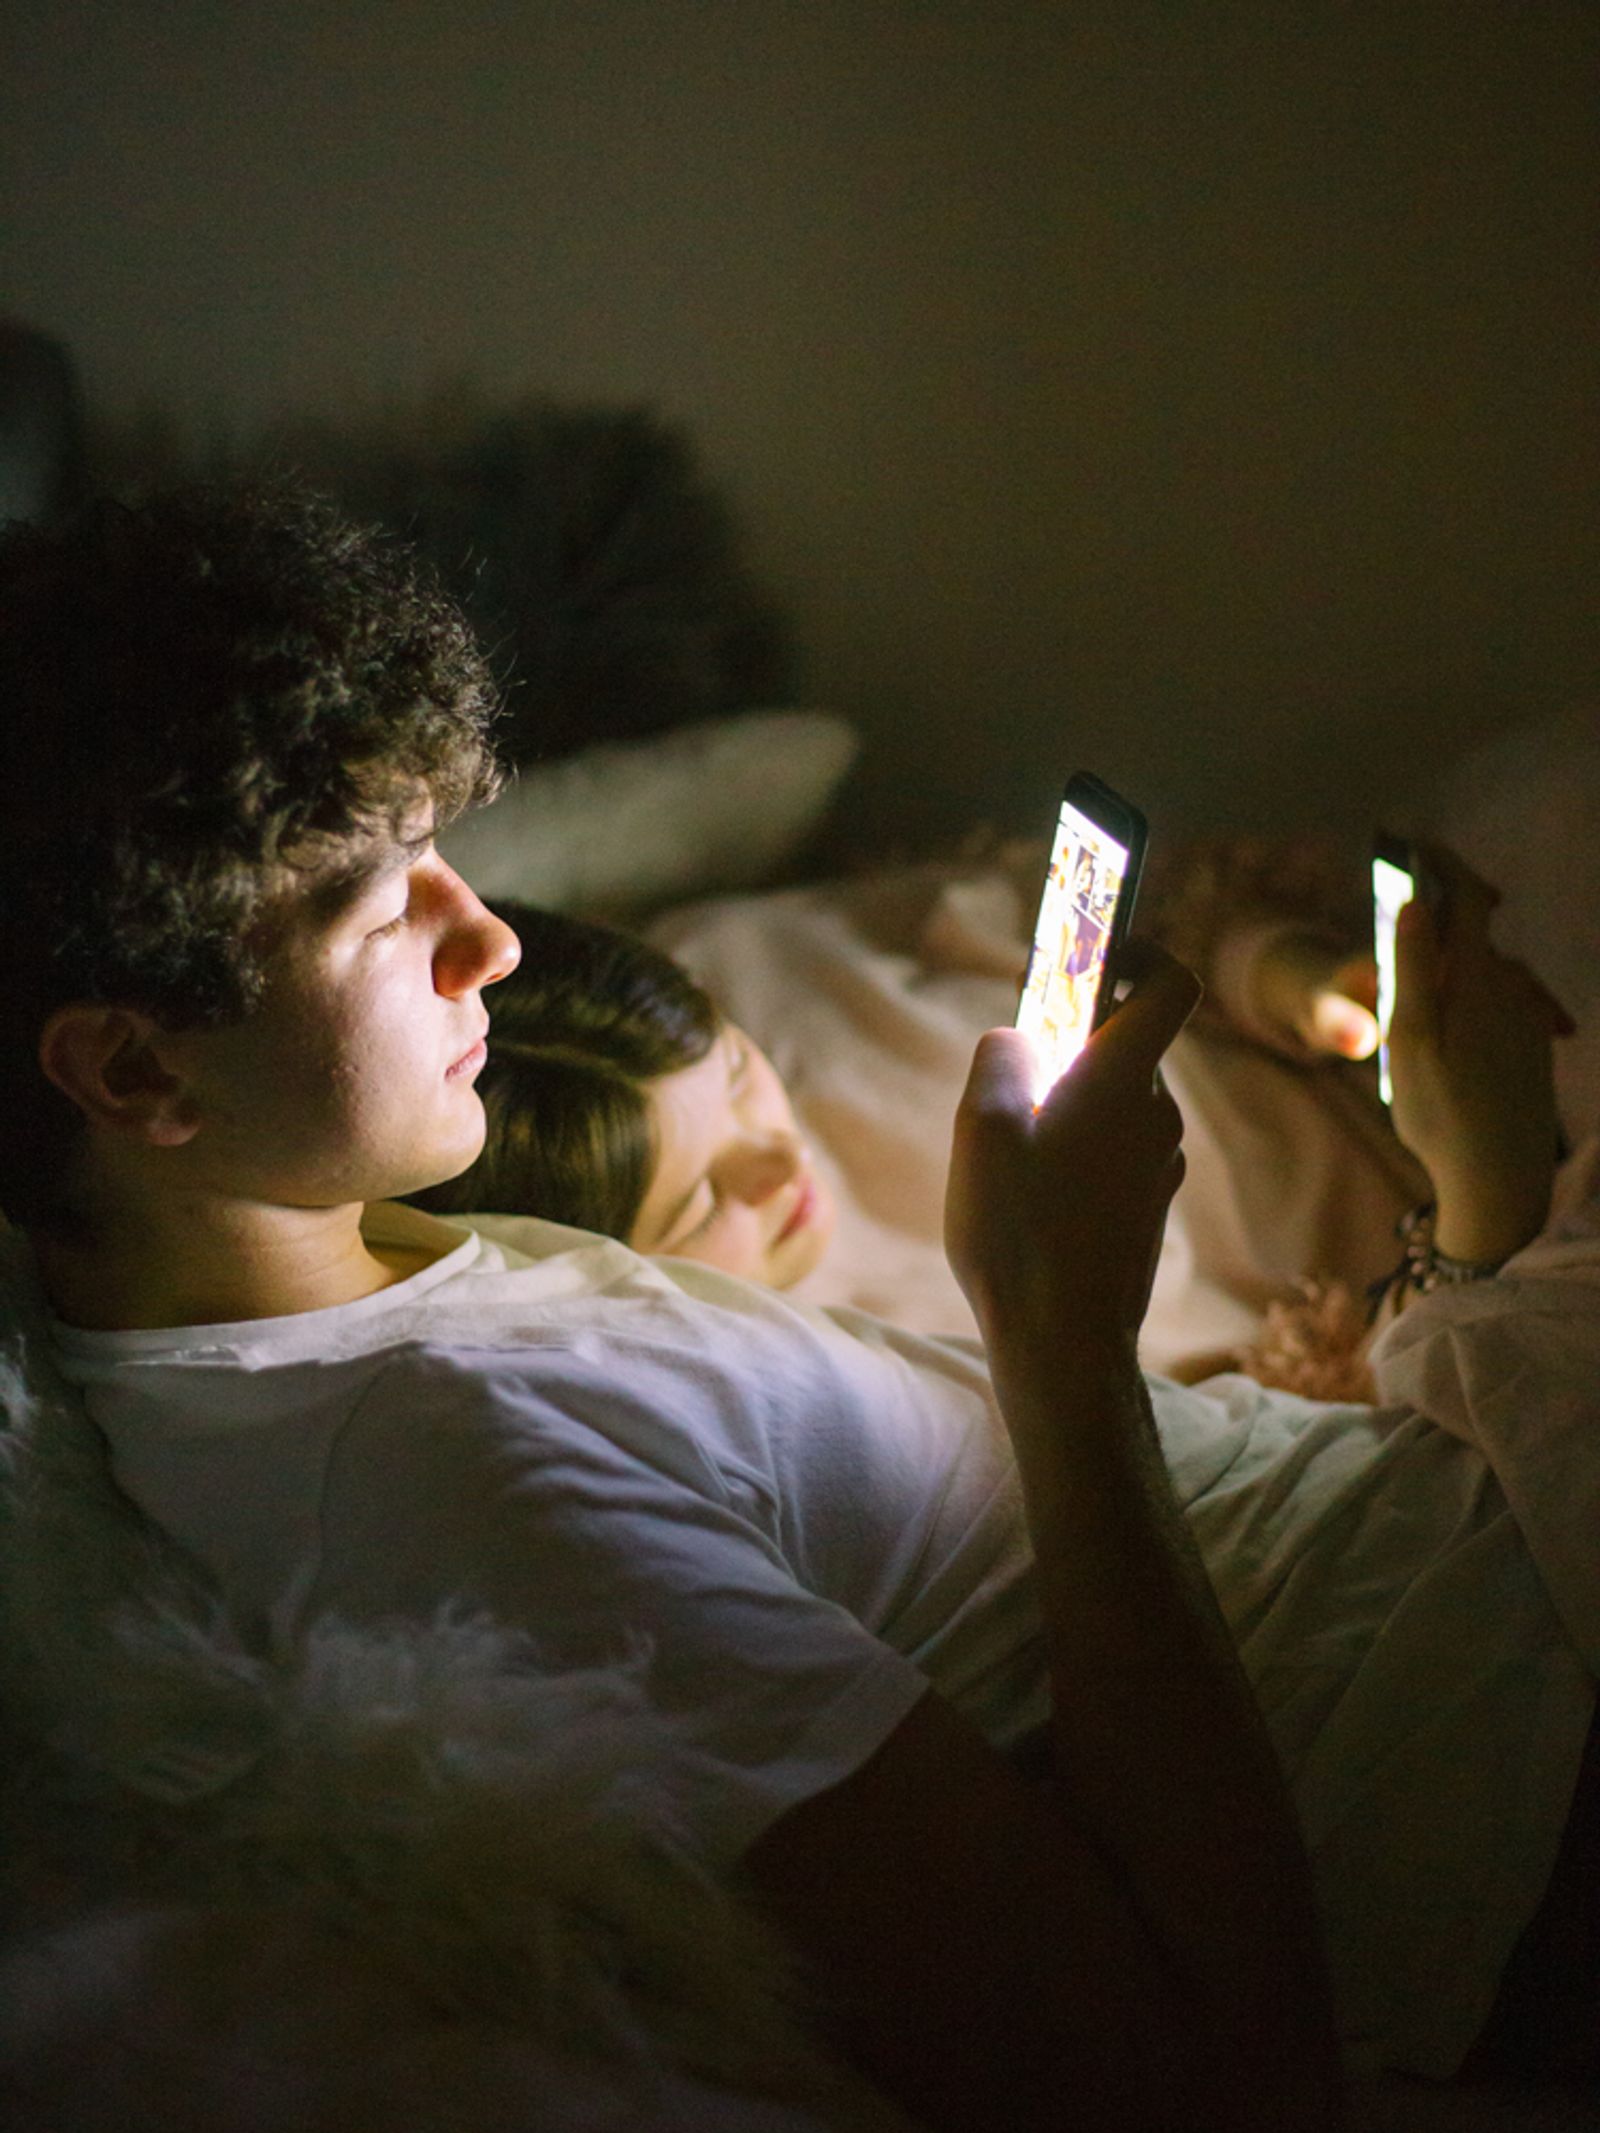 © Lea Franke - "They like to lie in bed together and scroll through Instagram"